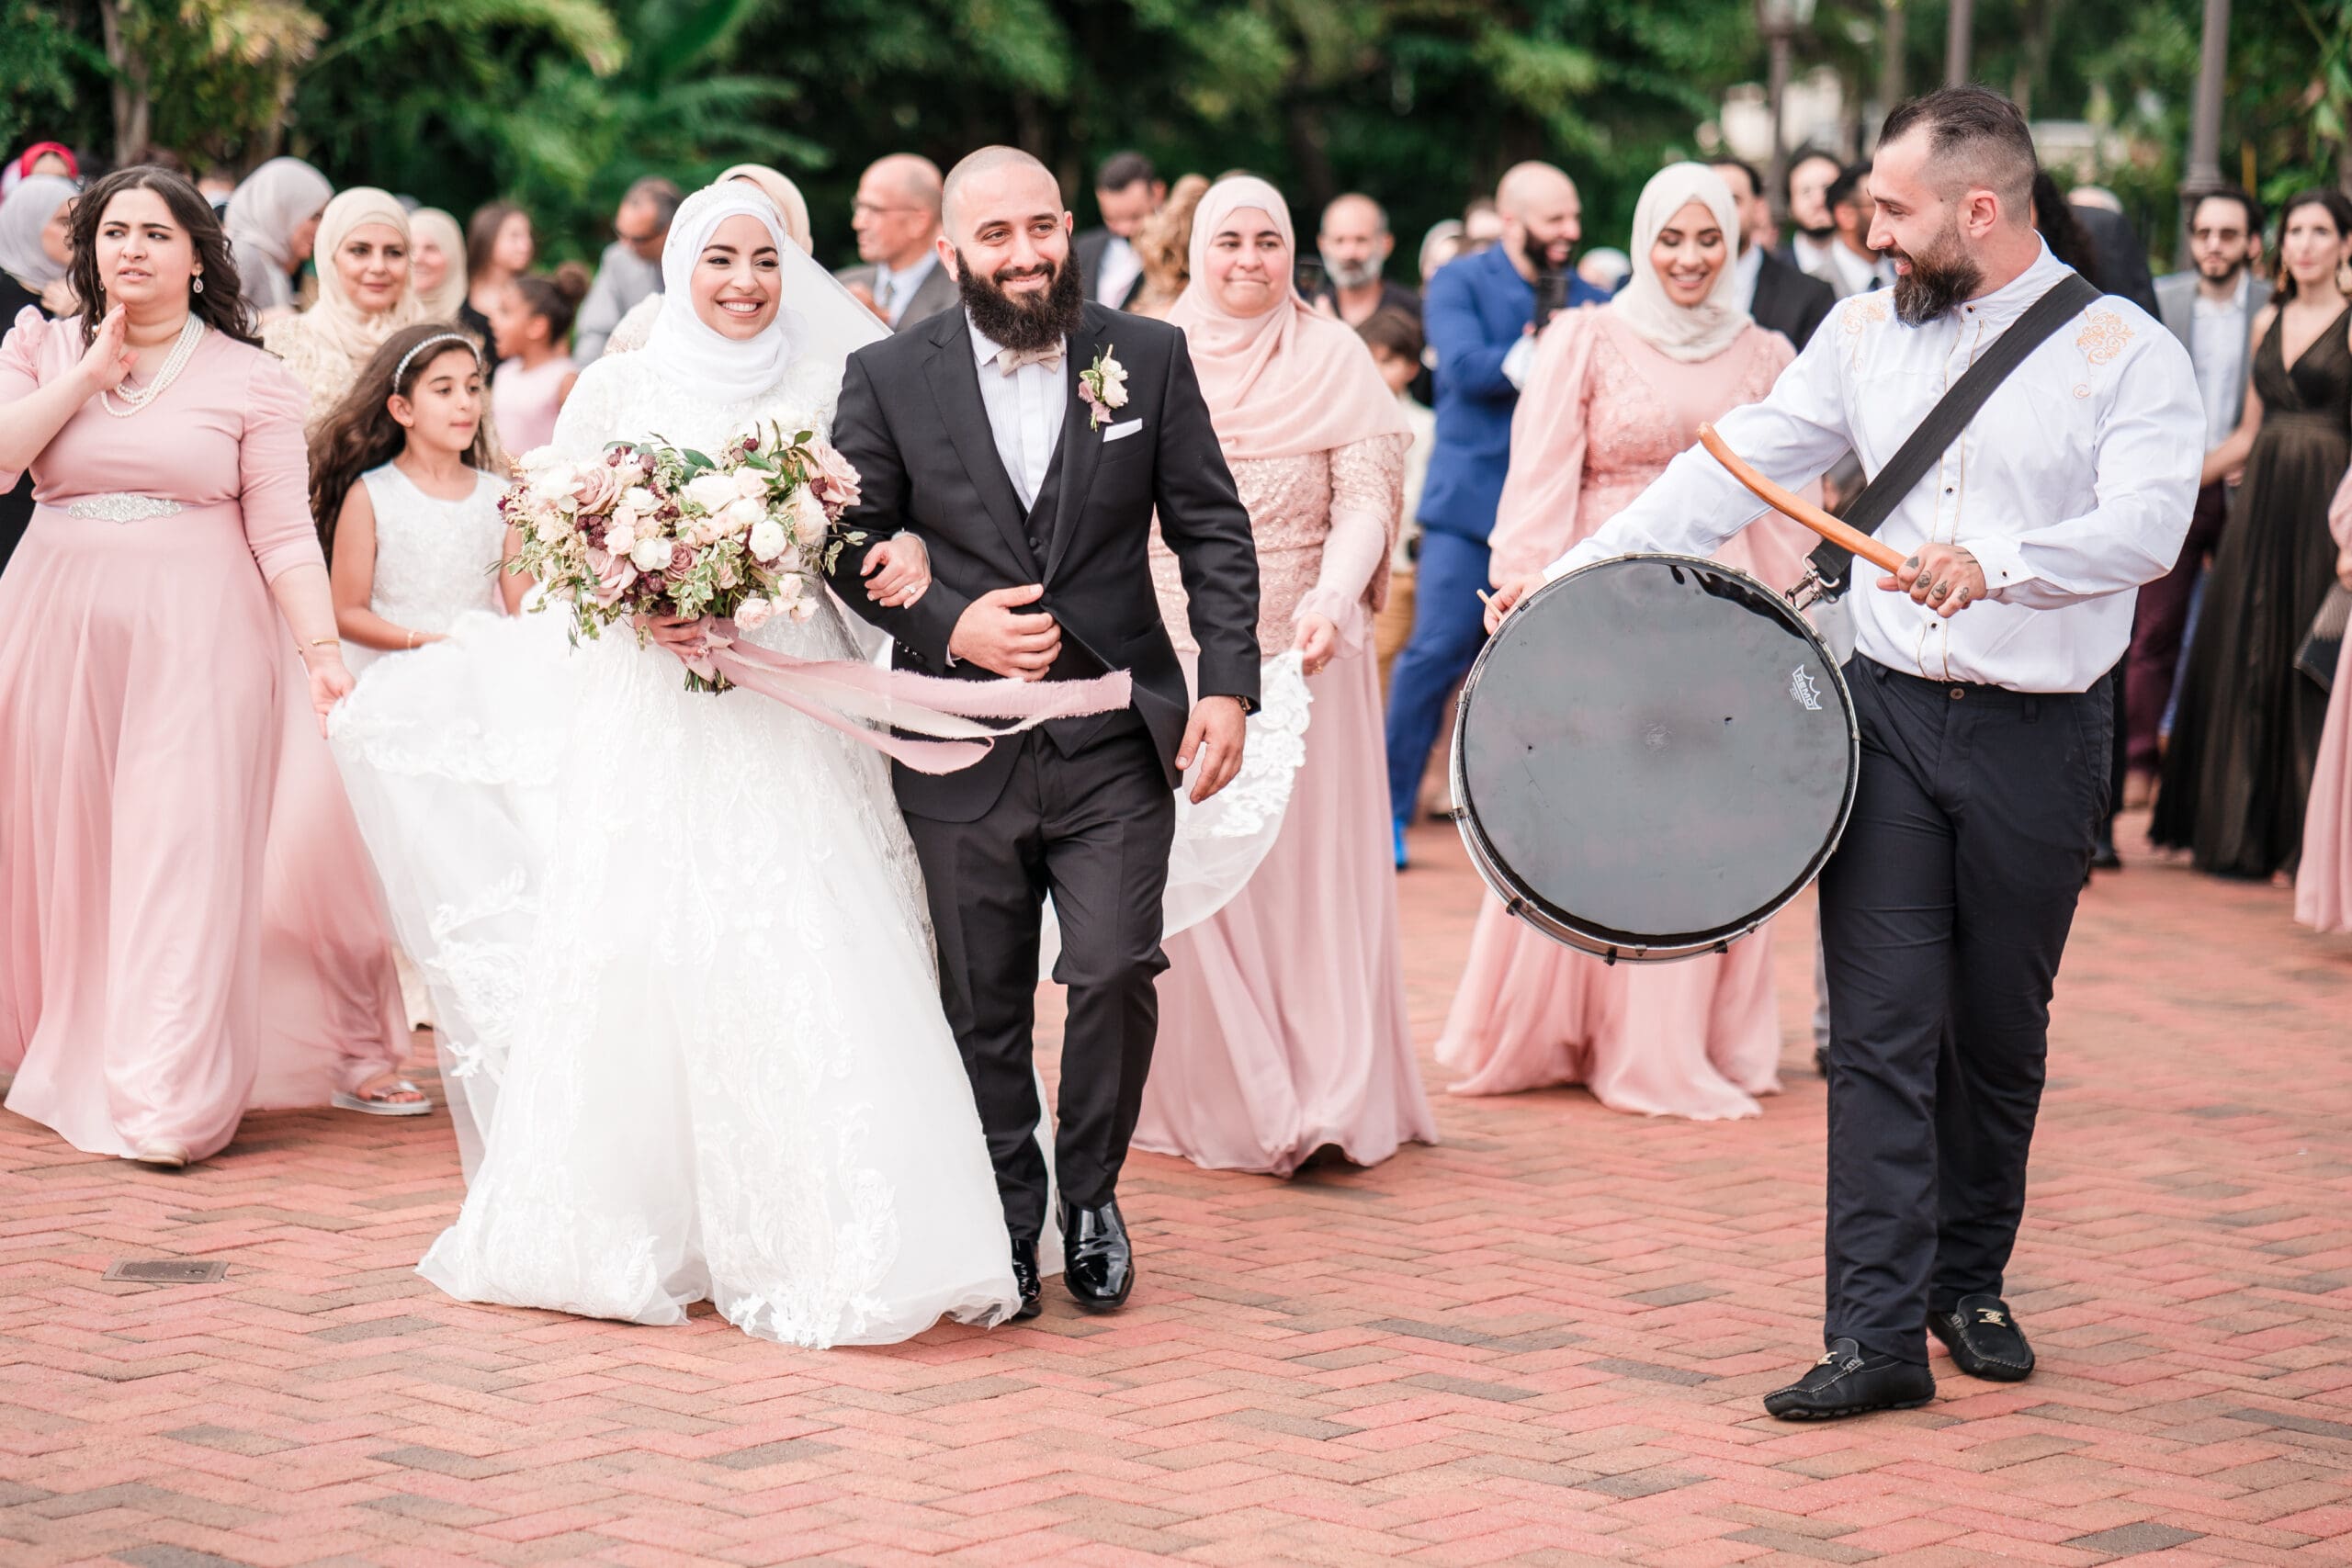 Couple leading a parade with drum players and guests walking behind them in a joyous celebration - cultural wedding photography